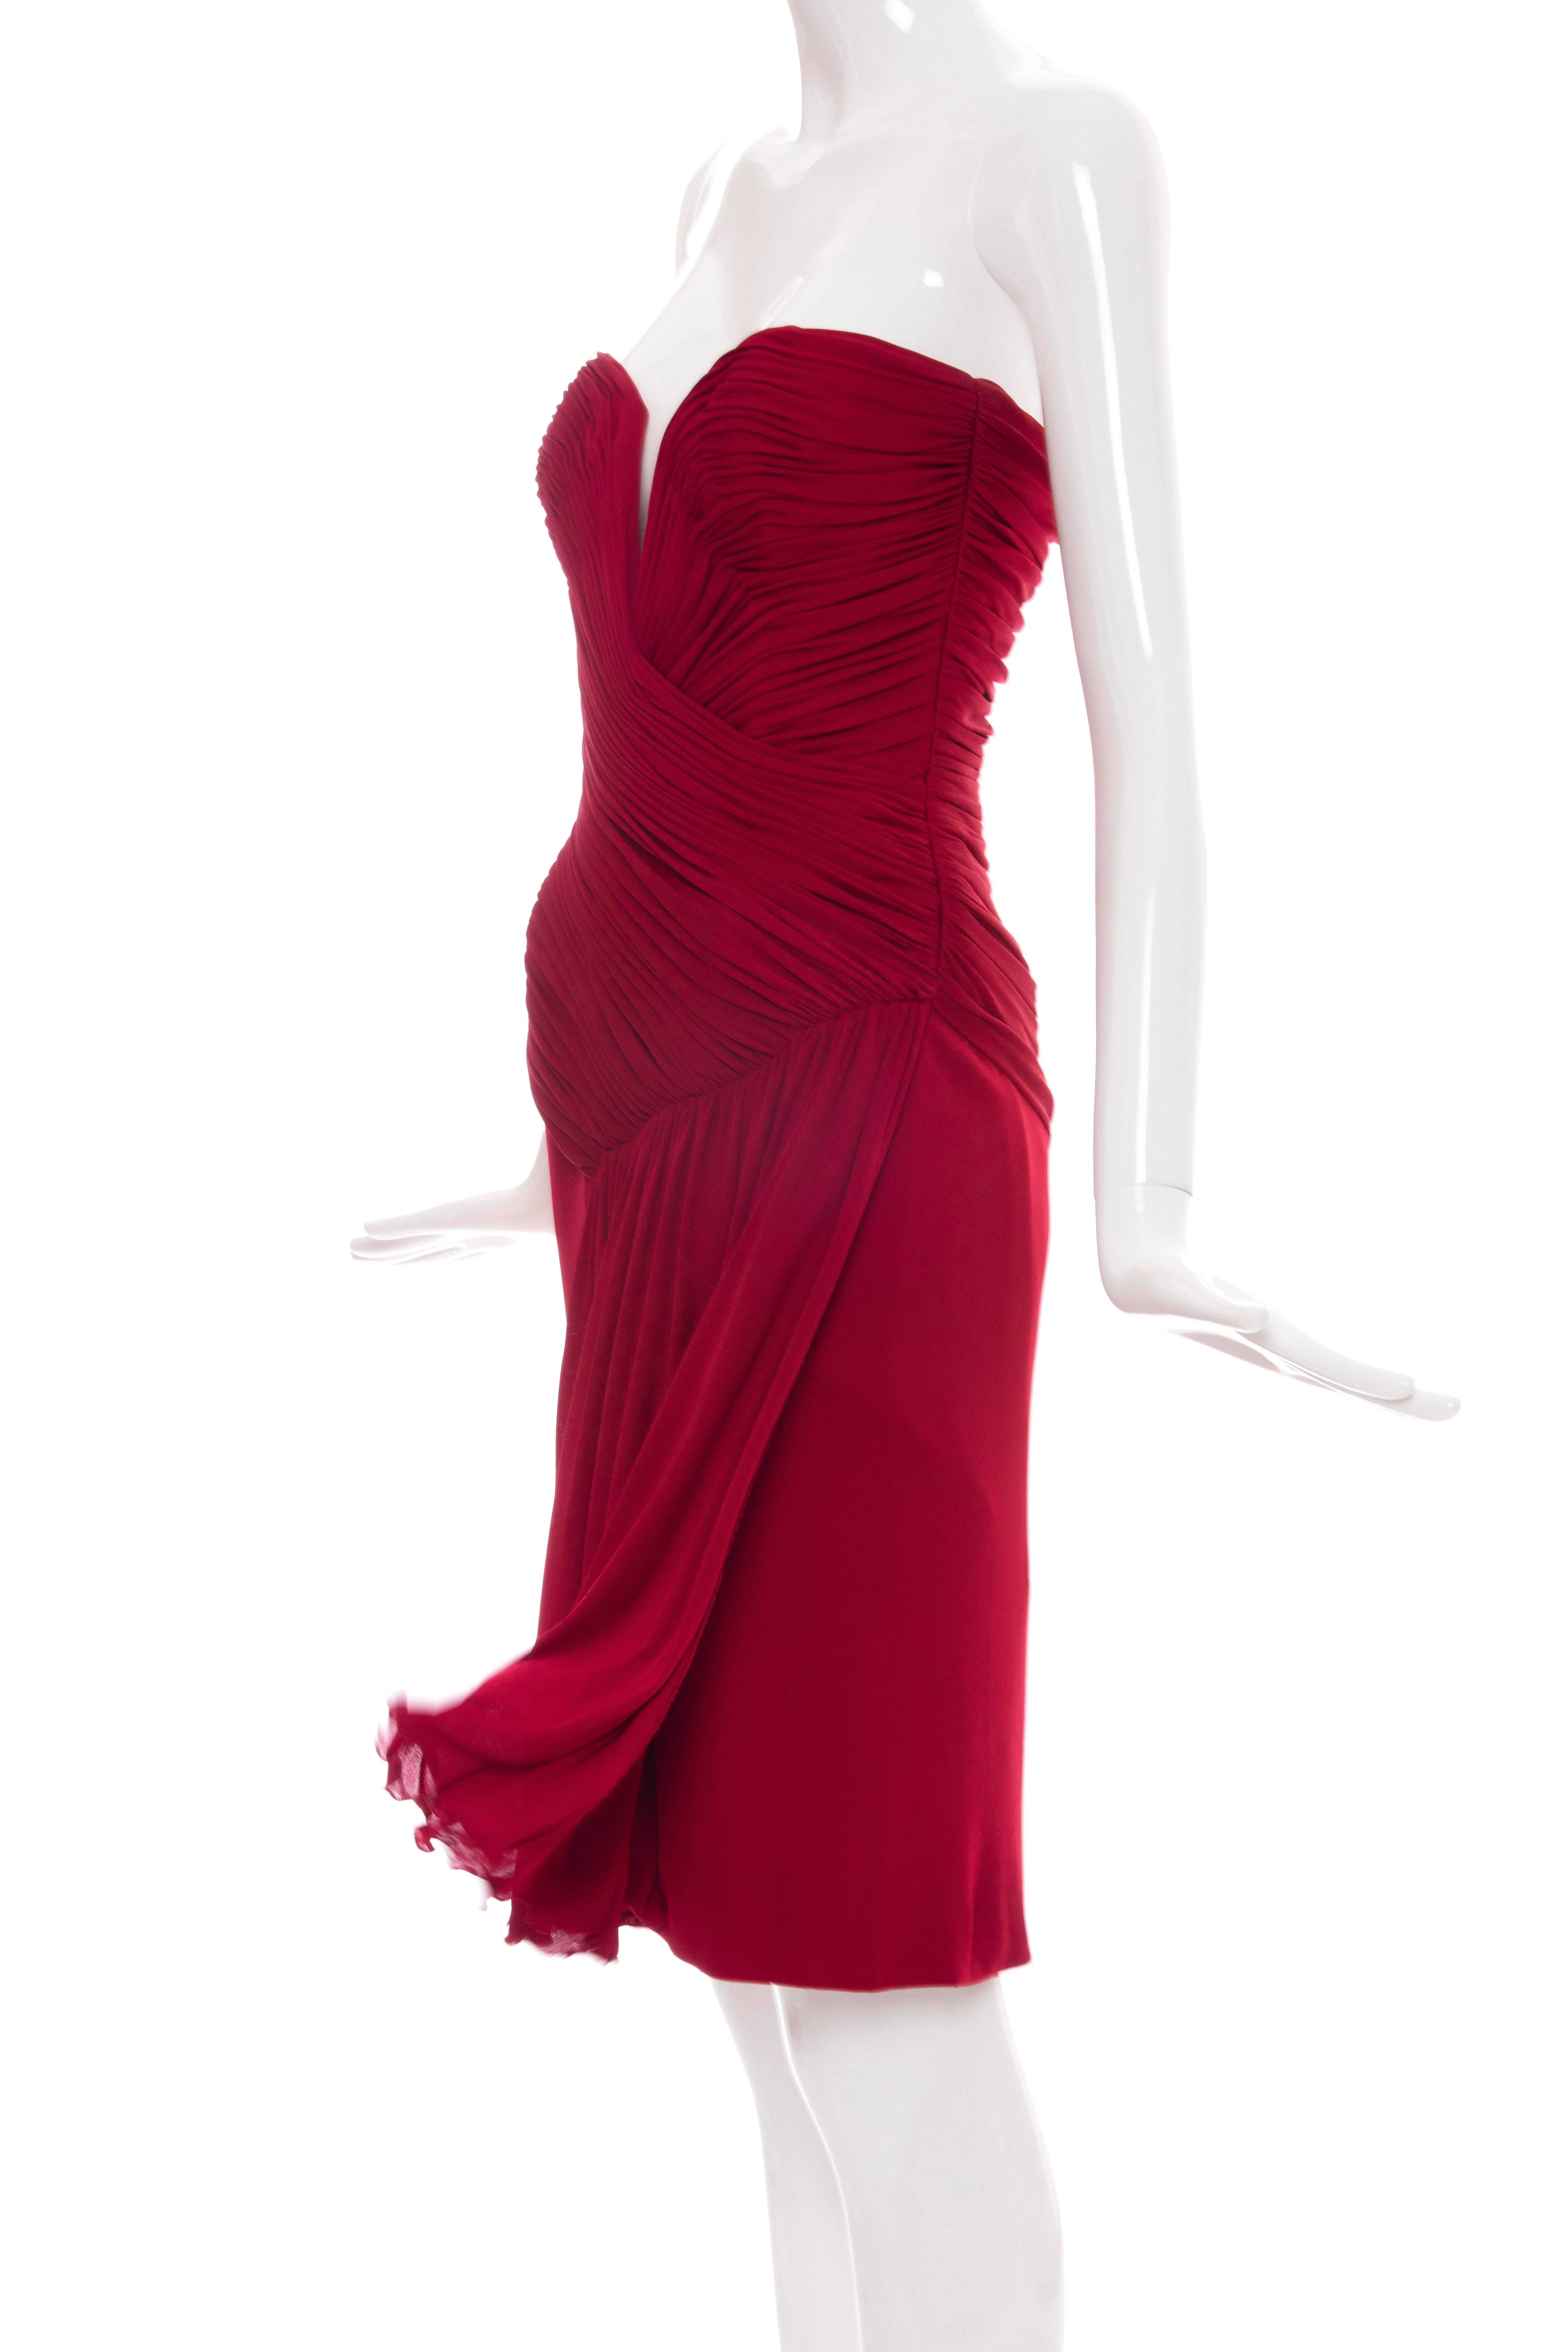 Vicky Tiel Couture Red Strapless Dress With Ruched Bodice, Circa 1980's For Sale 3